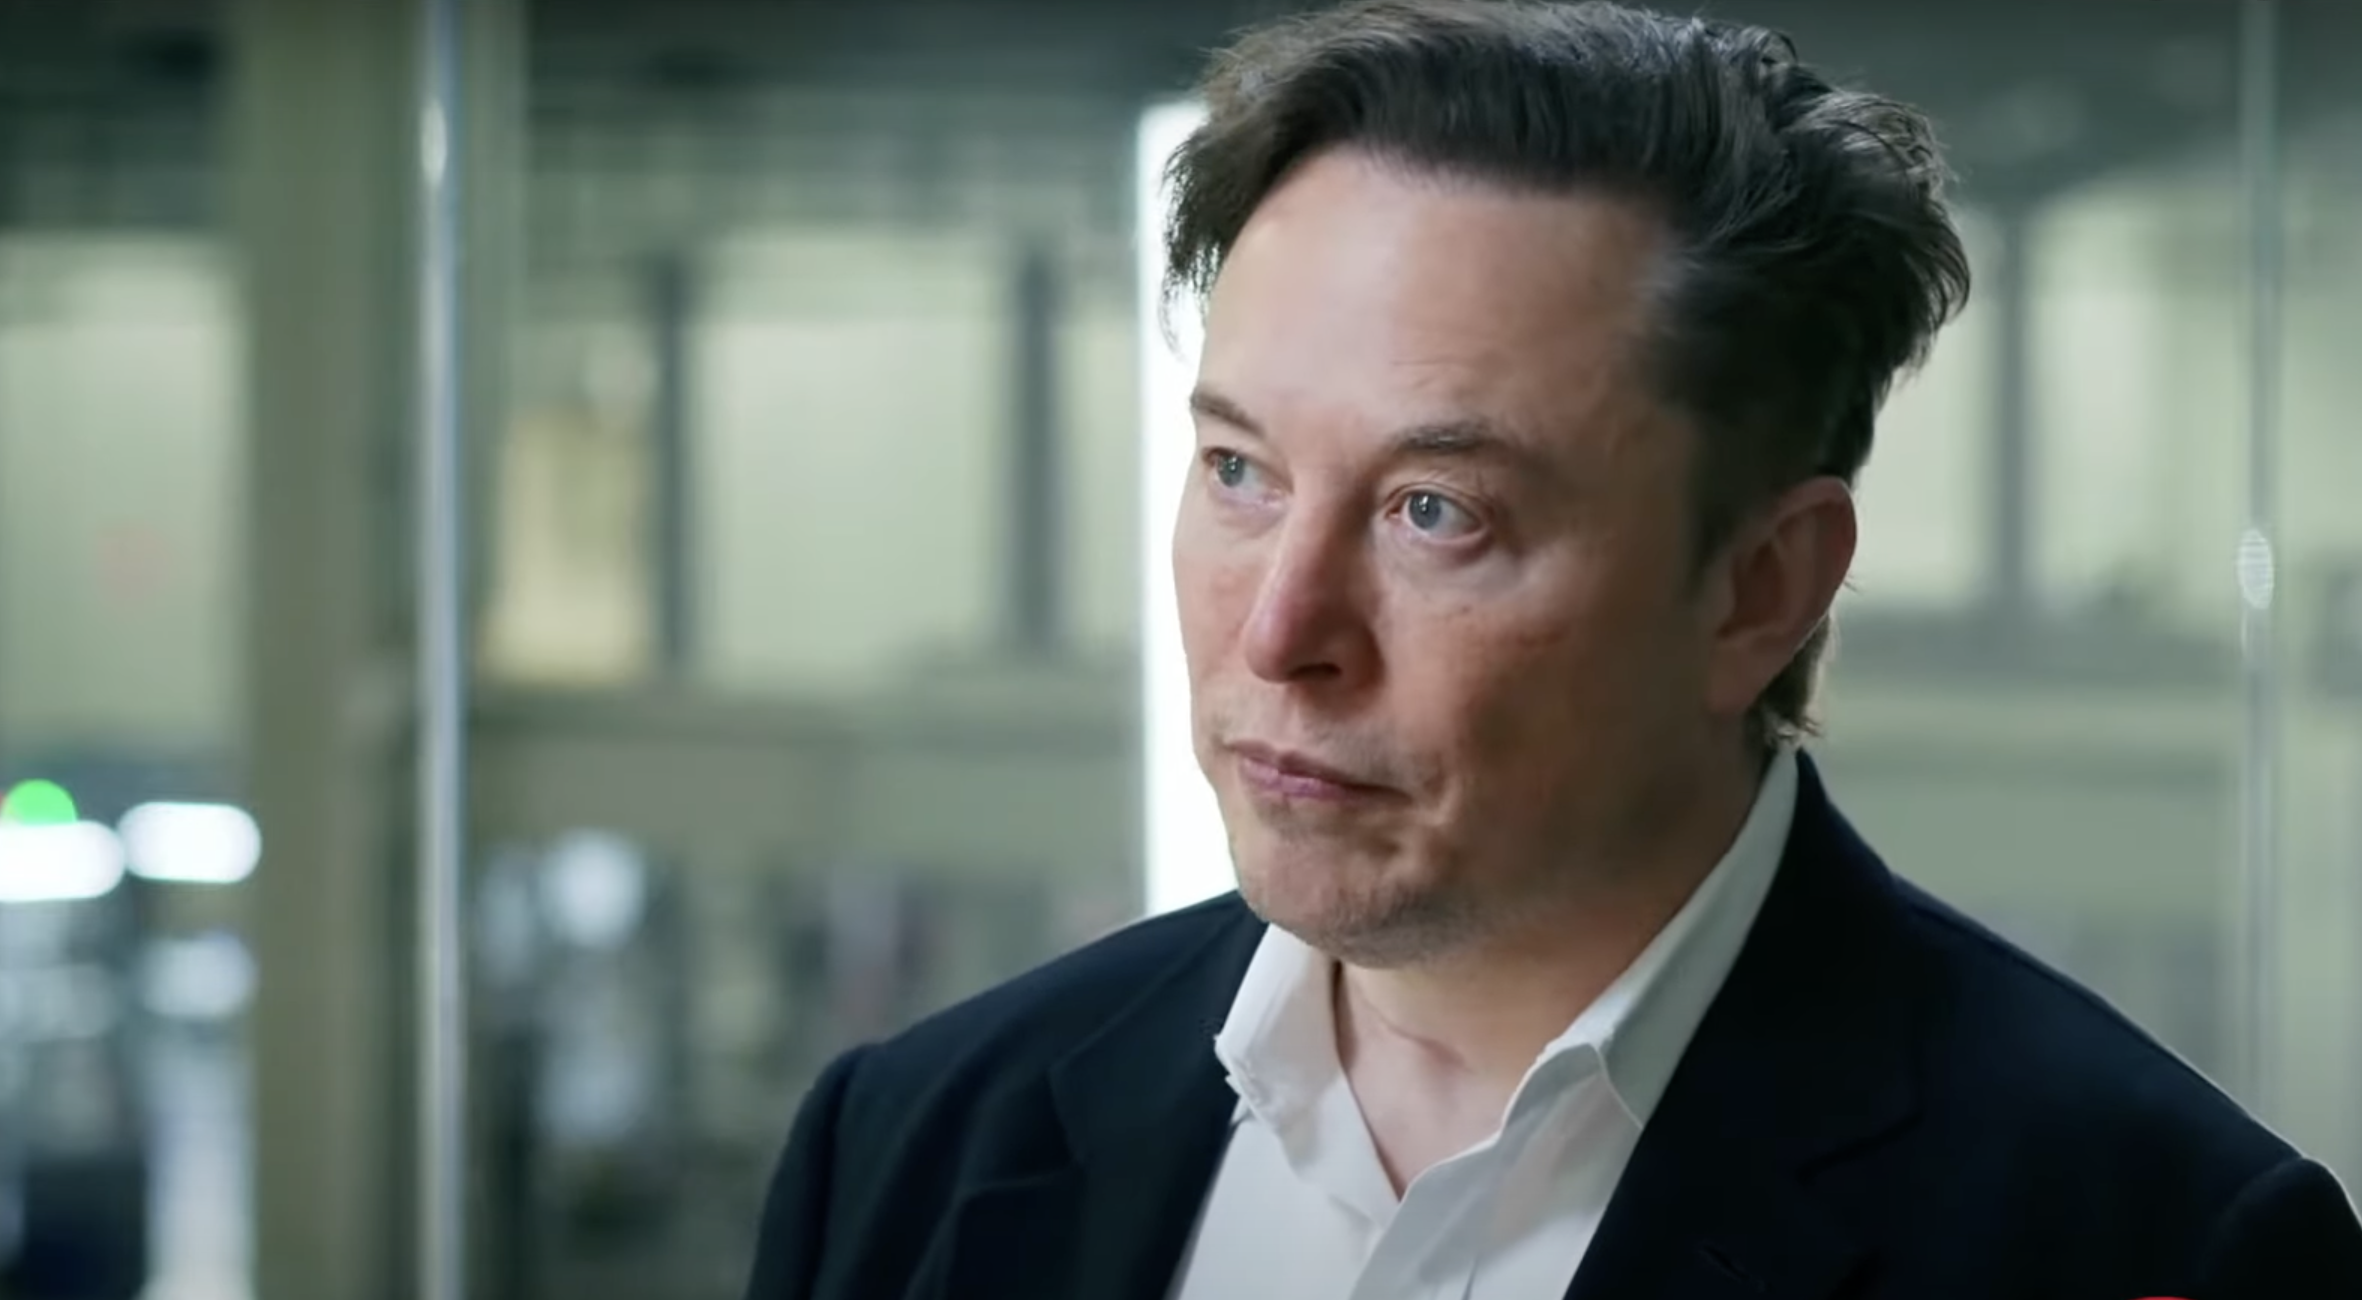 Picture of Elon Musk - Example of a B2C Thought Leader